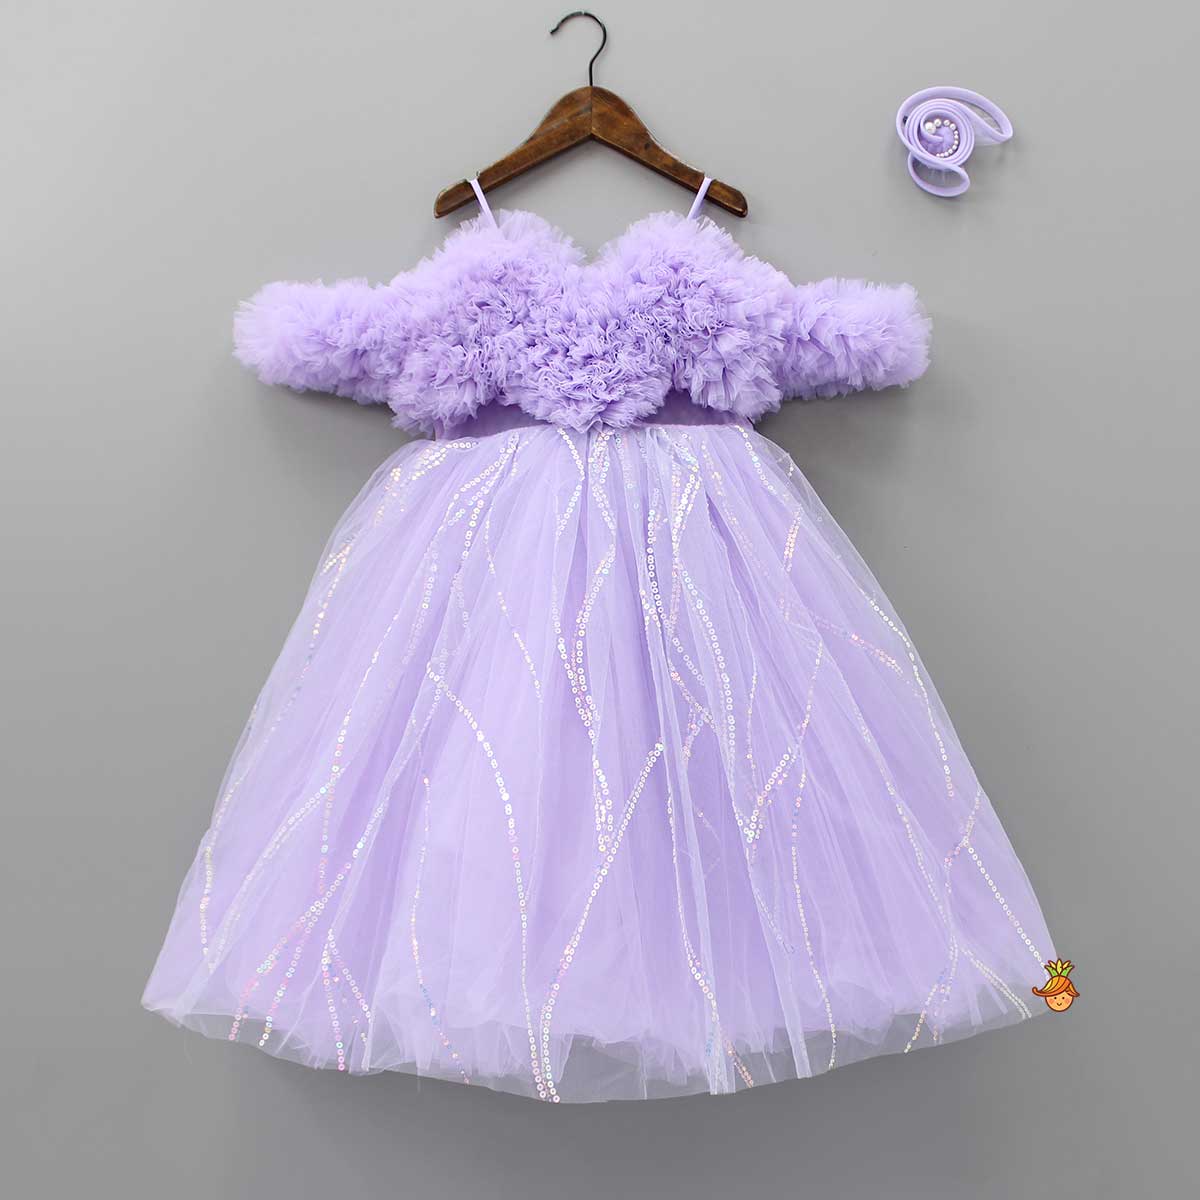 Exquisite Ruffled Lavender Gown With Matching Hair Clip